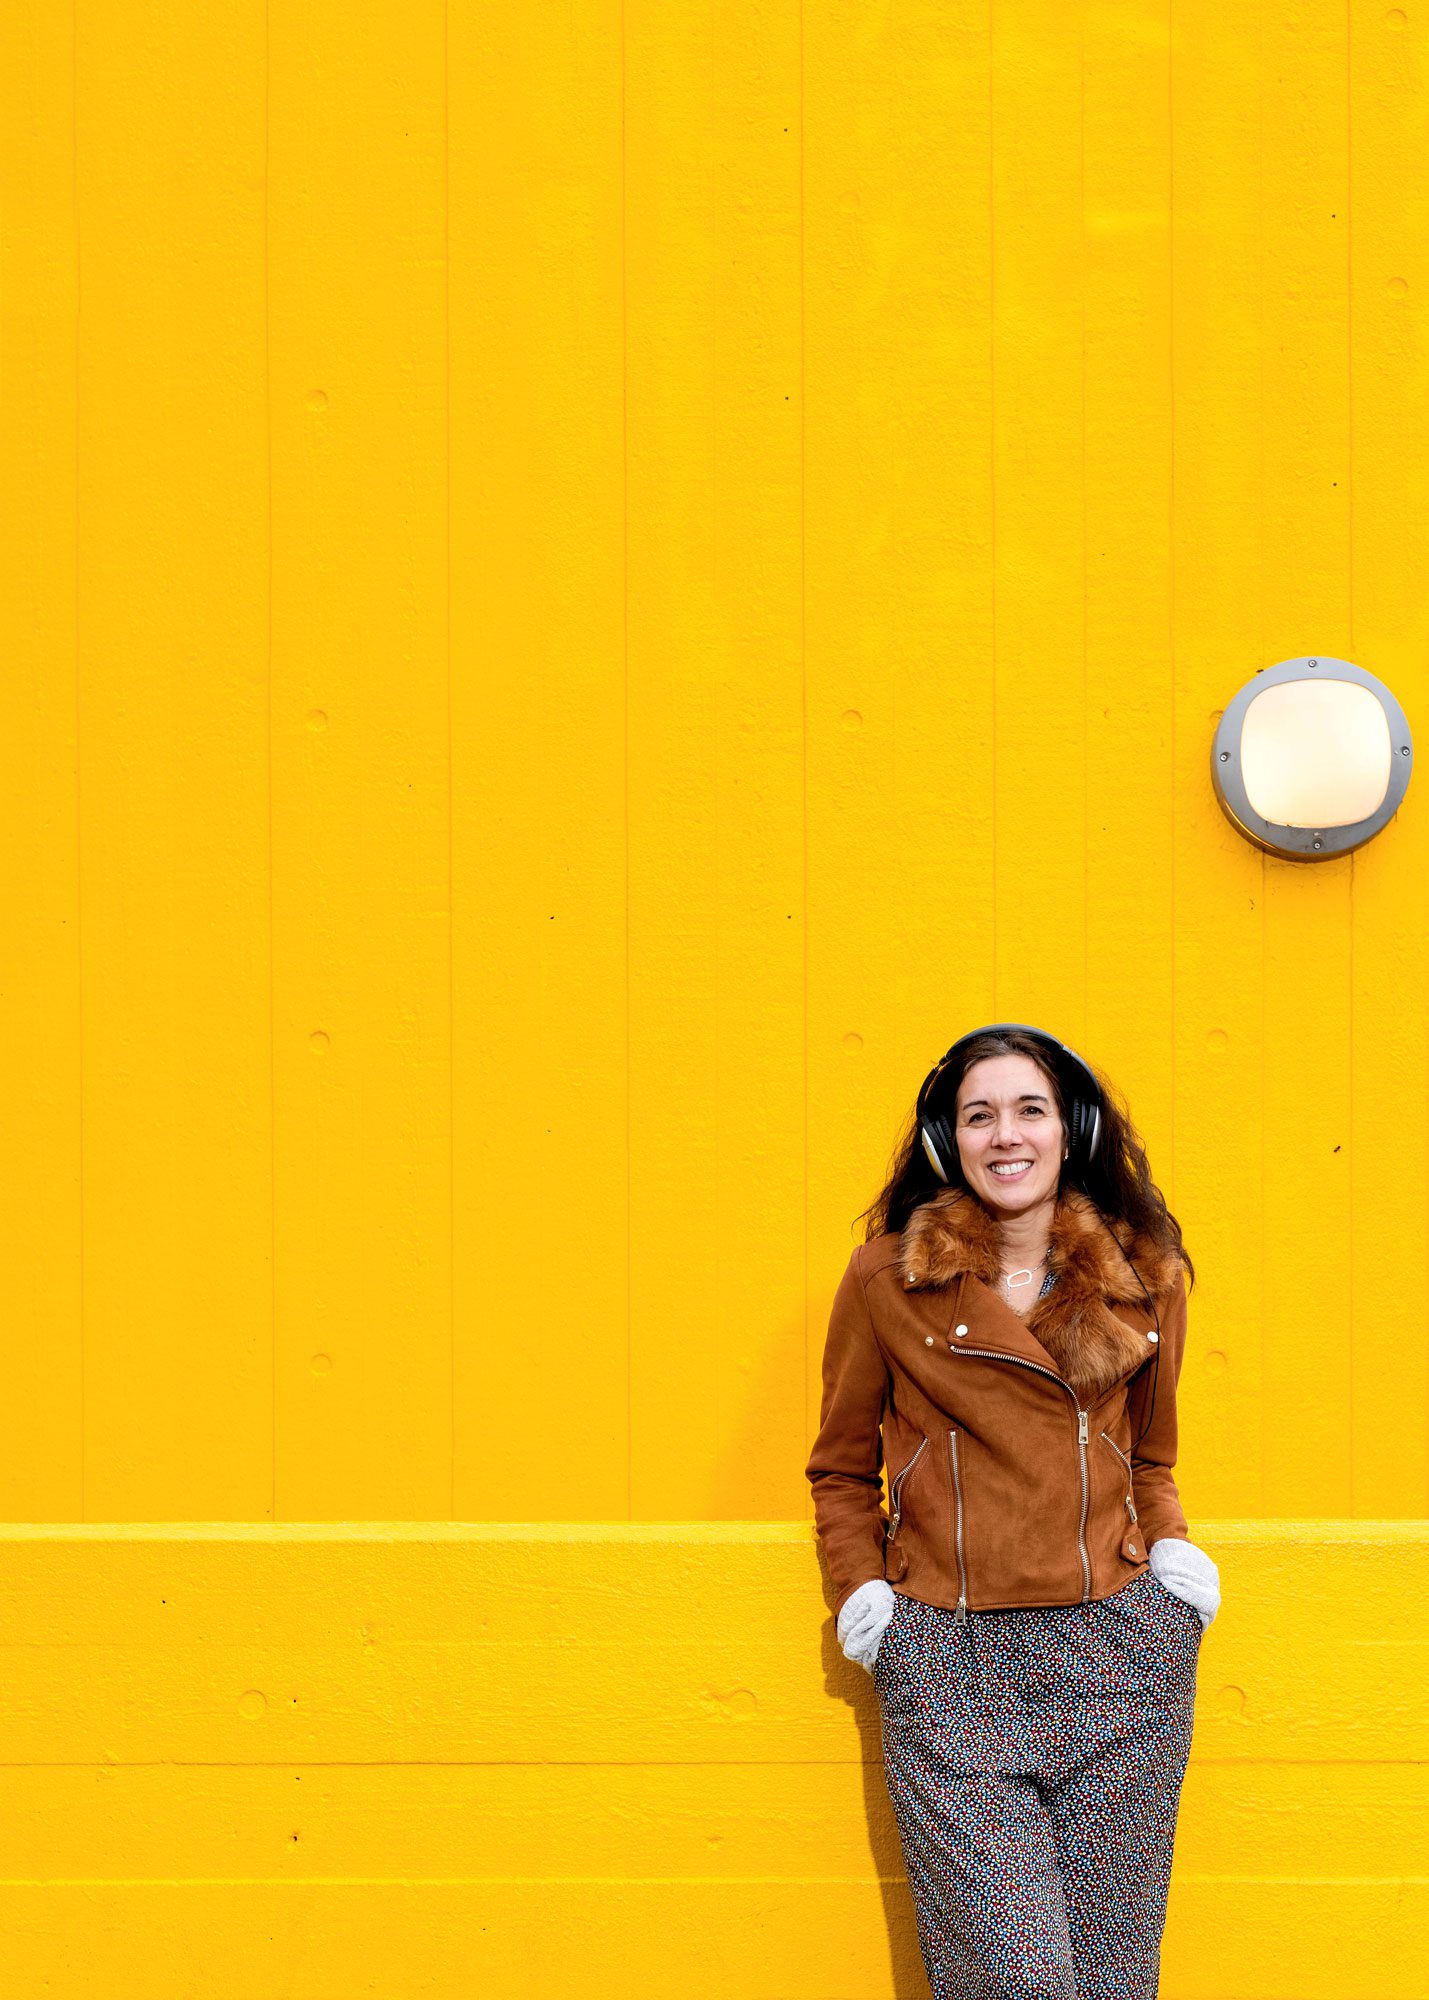 Woman wearing headphones leaning against a bright yellow walls.